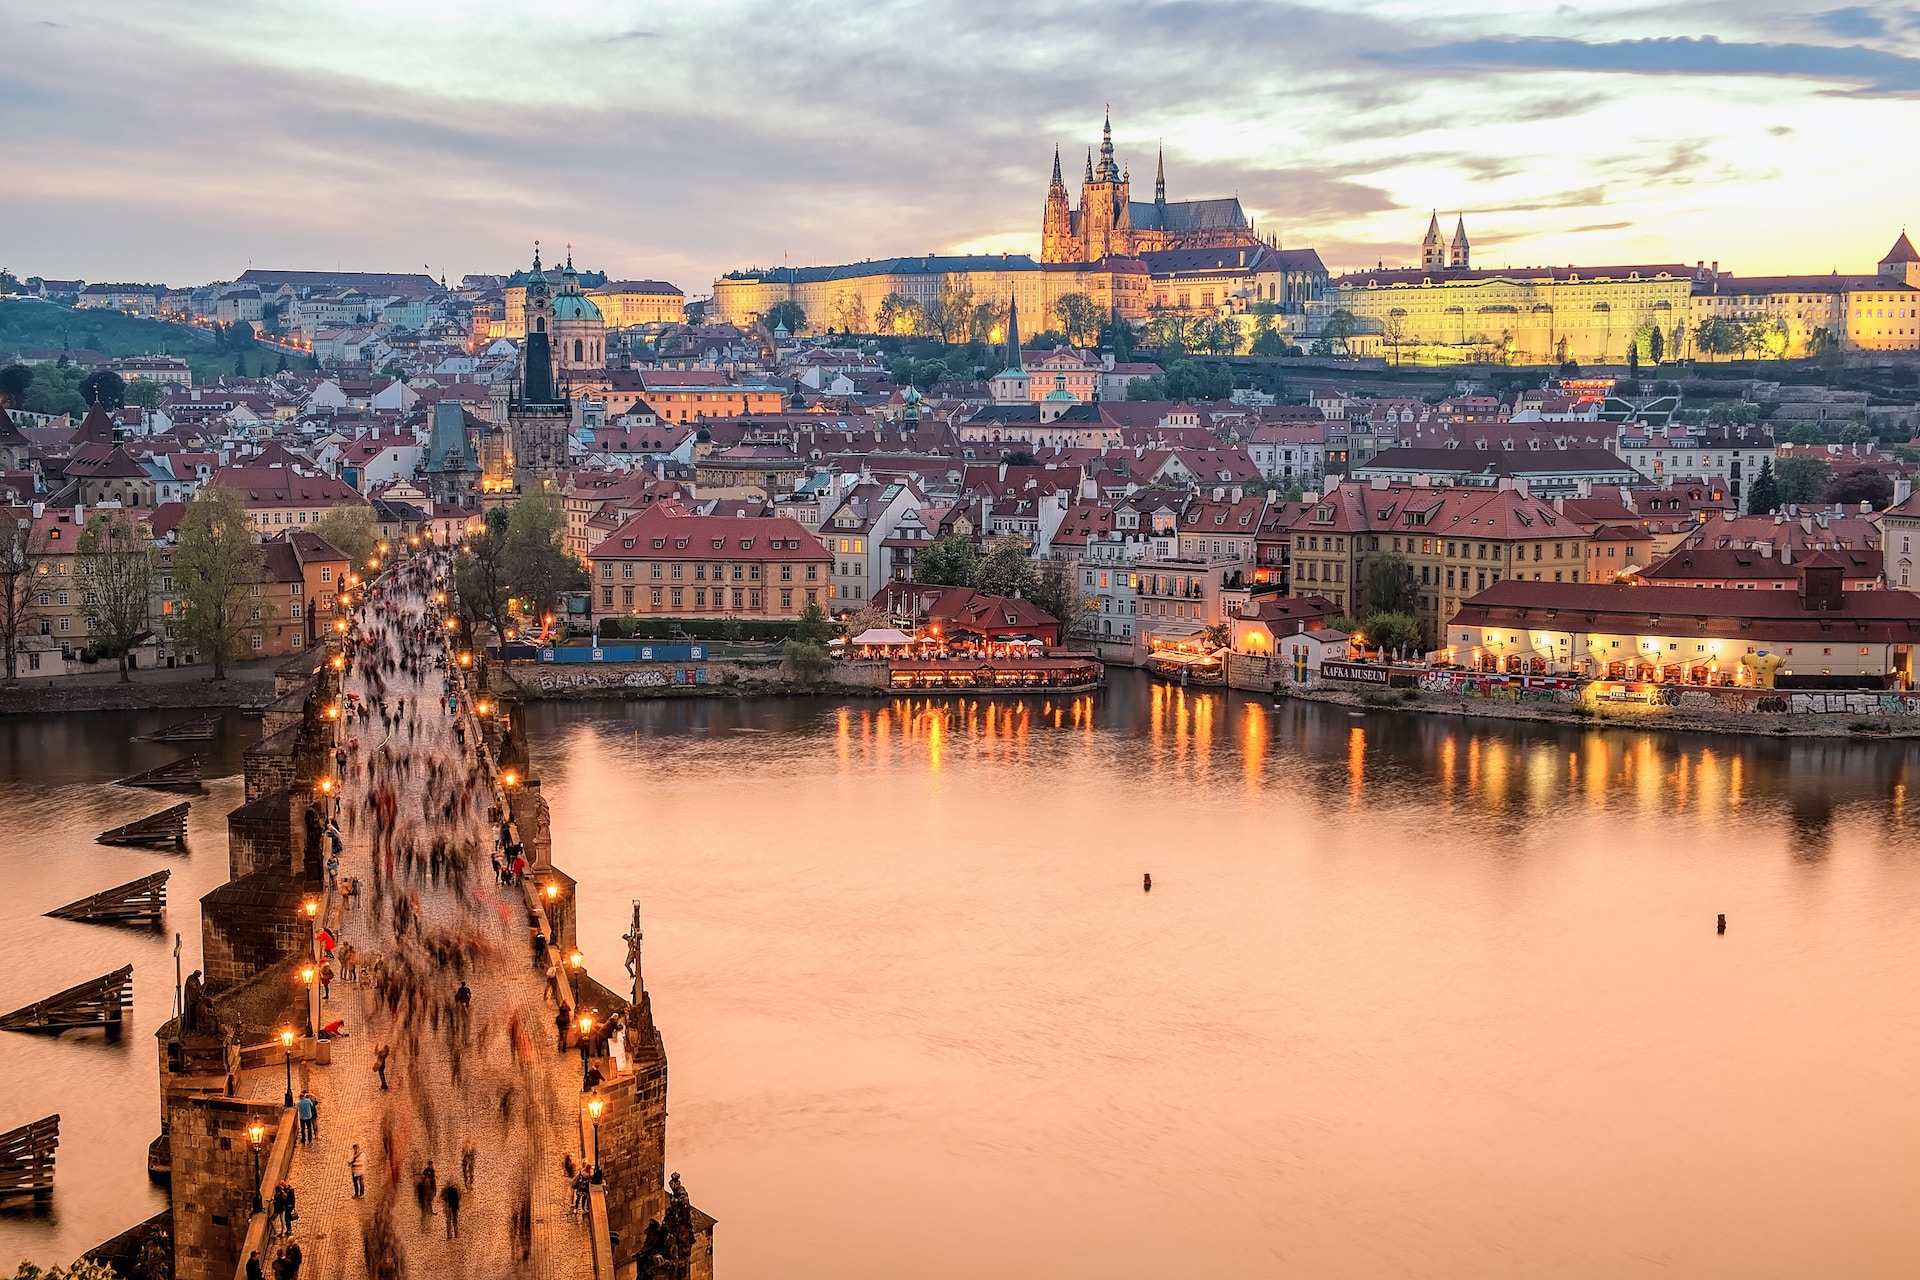 A beautiful view of Prague, one of the best places to visit in Europe for a romantic getaway